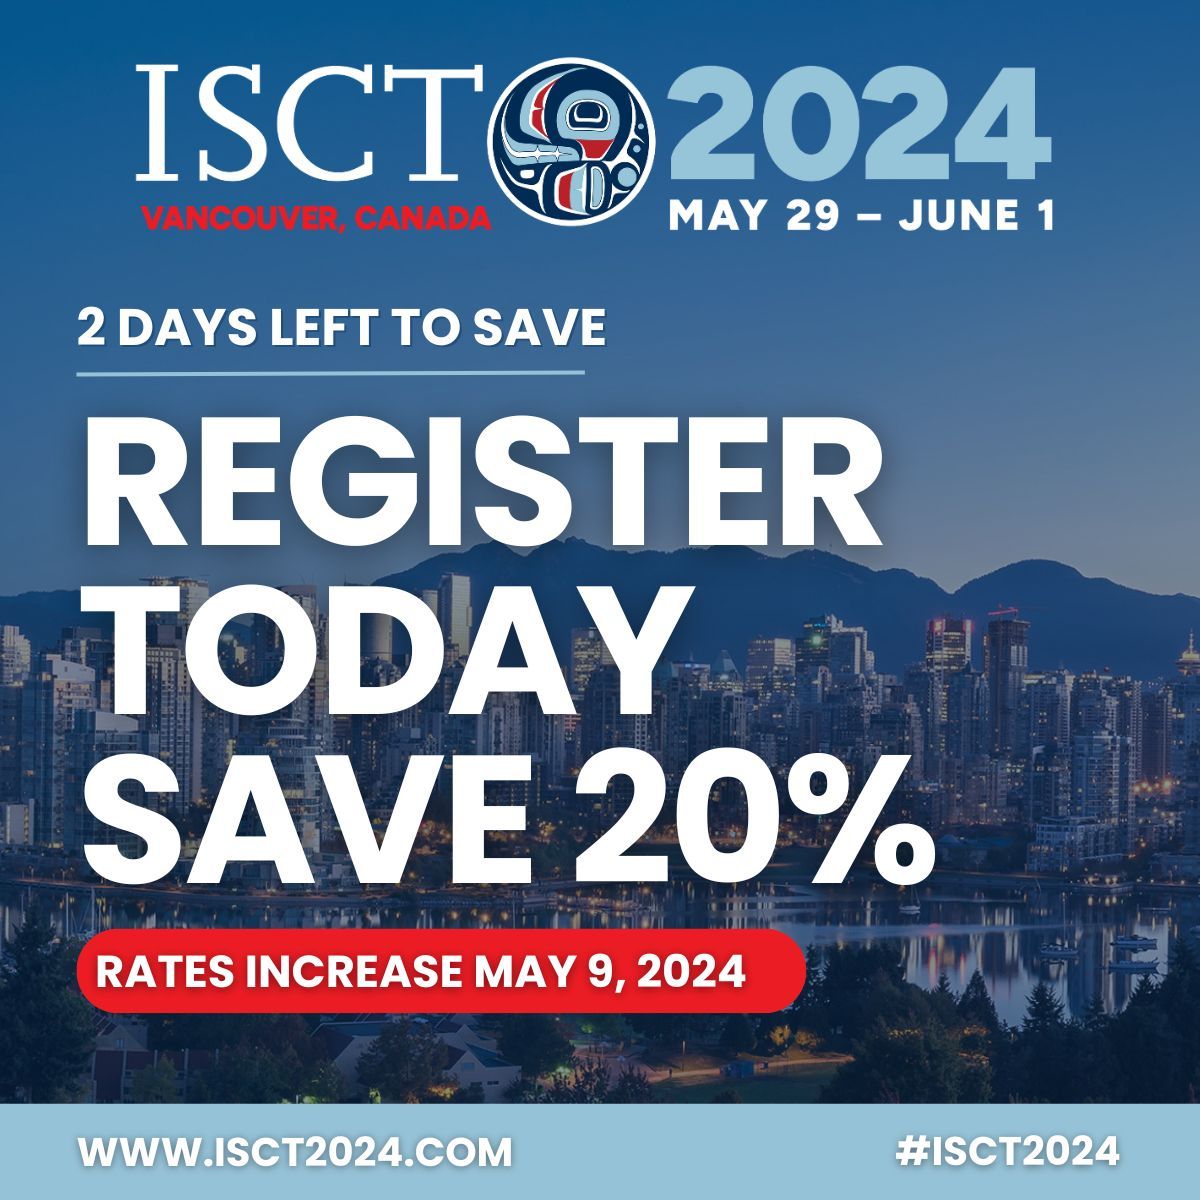 Don't miss your chance to save! Register today for ISCT 2024 Vancouver and save 20% on full conference registration: buff.ly/484XMFT